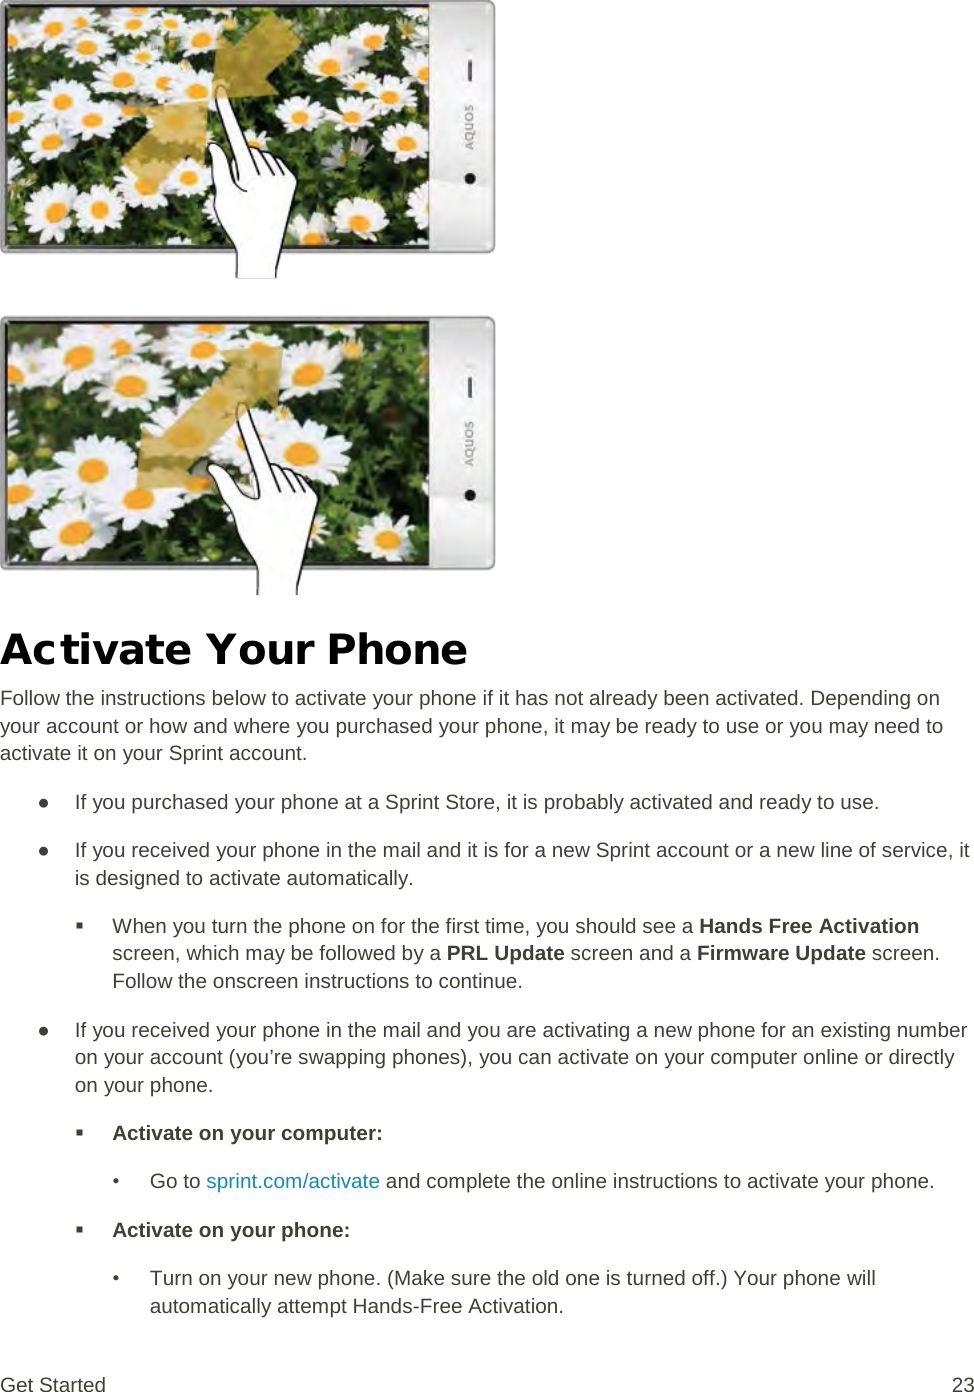   Activate Your Phone Follow the instructions below to activate your phone if it has not already been activated. Depending on your account or how and where you purchased your phone, it may be ready to use or you may need to activate it on your Sprint account. ● If you purchased your phone at a Sprint Store, it is probably activated and ready to use. ● If you received your phone in the mail and it is for a new Sprint account or a new line of service, it is designed to activate automatically.  When you turn the phone on for the first time, you should see a Hands Free Activation screen, which may be followed by a PRL Update screen and a Firmware Update screen. Follow the onscreen instructions to continue. ● If you received your phone in the mail and you are activating a new phone for an existing number on your account (you’re swapping phones), you can activate on your computer online or directly on your phone.  Activate on your computer: • Go to sprint.com/activate and complete the online instructions to activate your phone.  Activate on your phone: • Turn on your new phone. (Make sure the old one is turned off.) Your phone will automatically attempt Hands-Free Activation. Get Started 23 